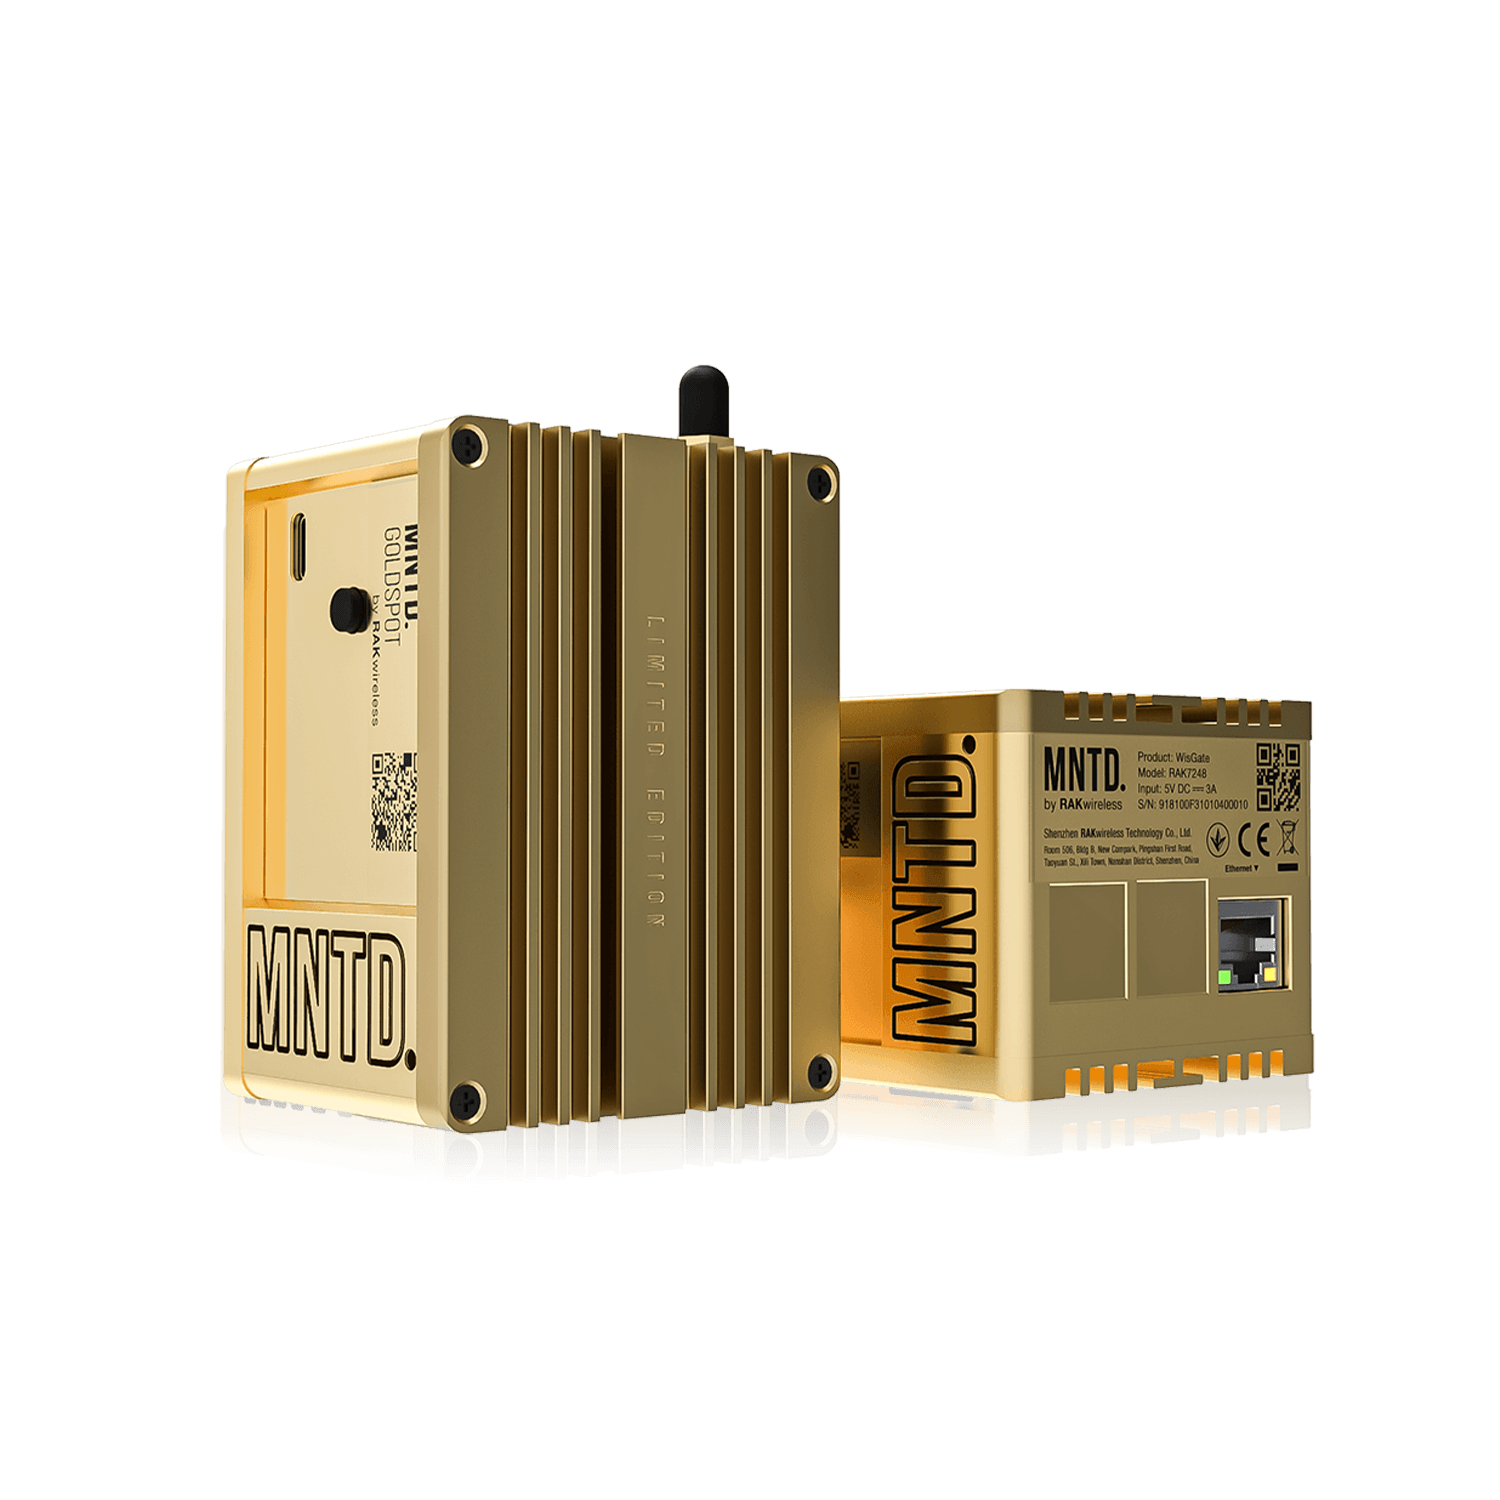 MNTD. Goldspot Miner - Limited Edition - LoRaWAN (US915) - Mapping Network